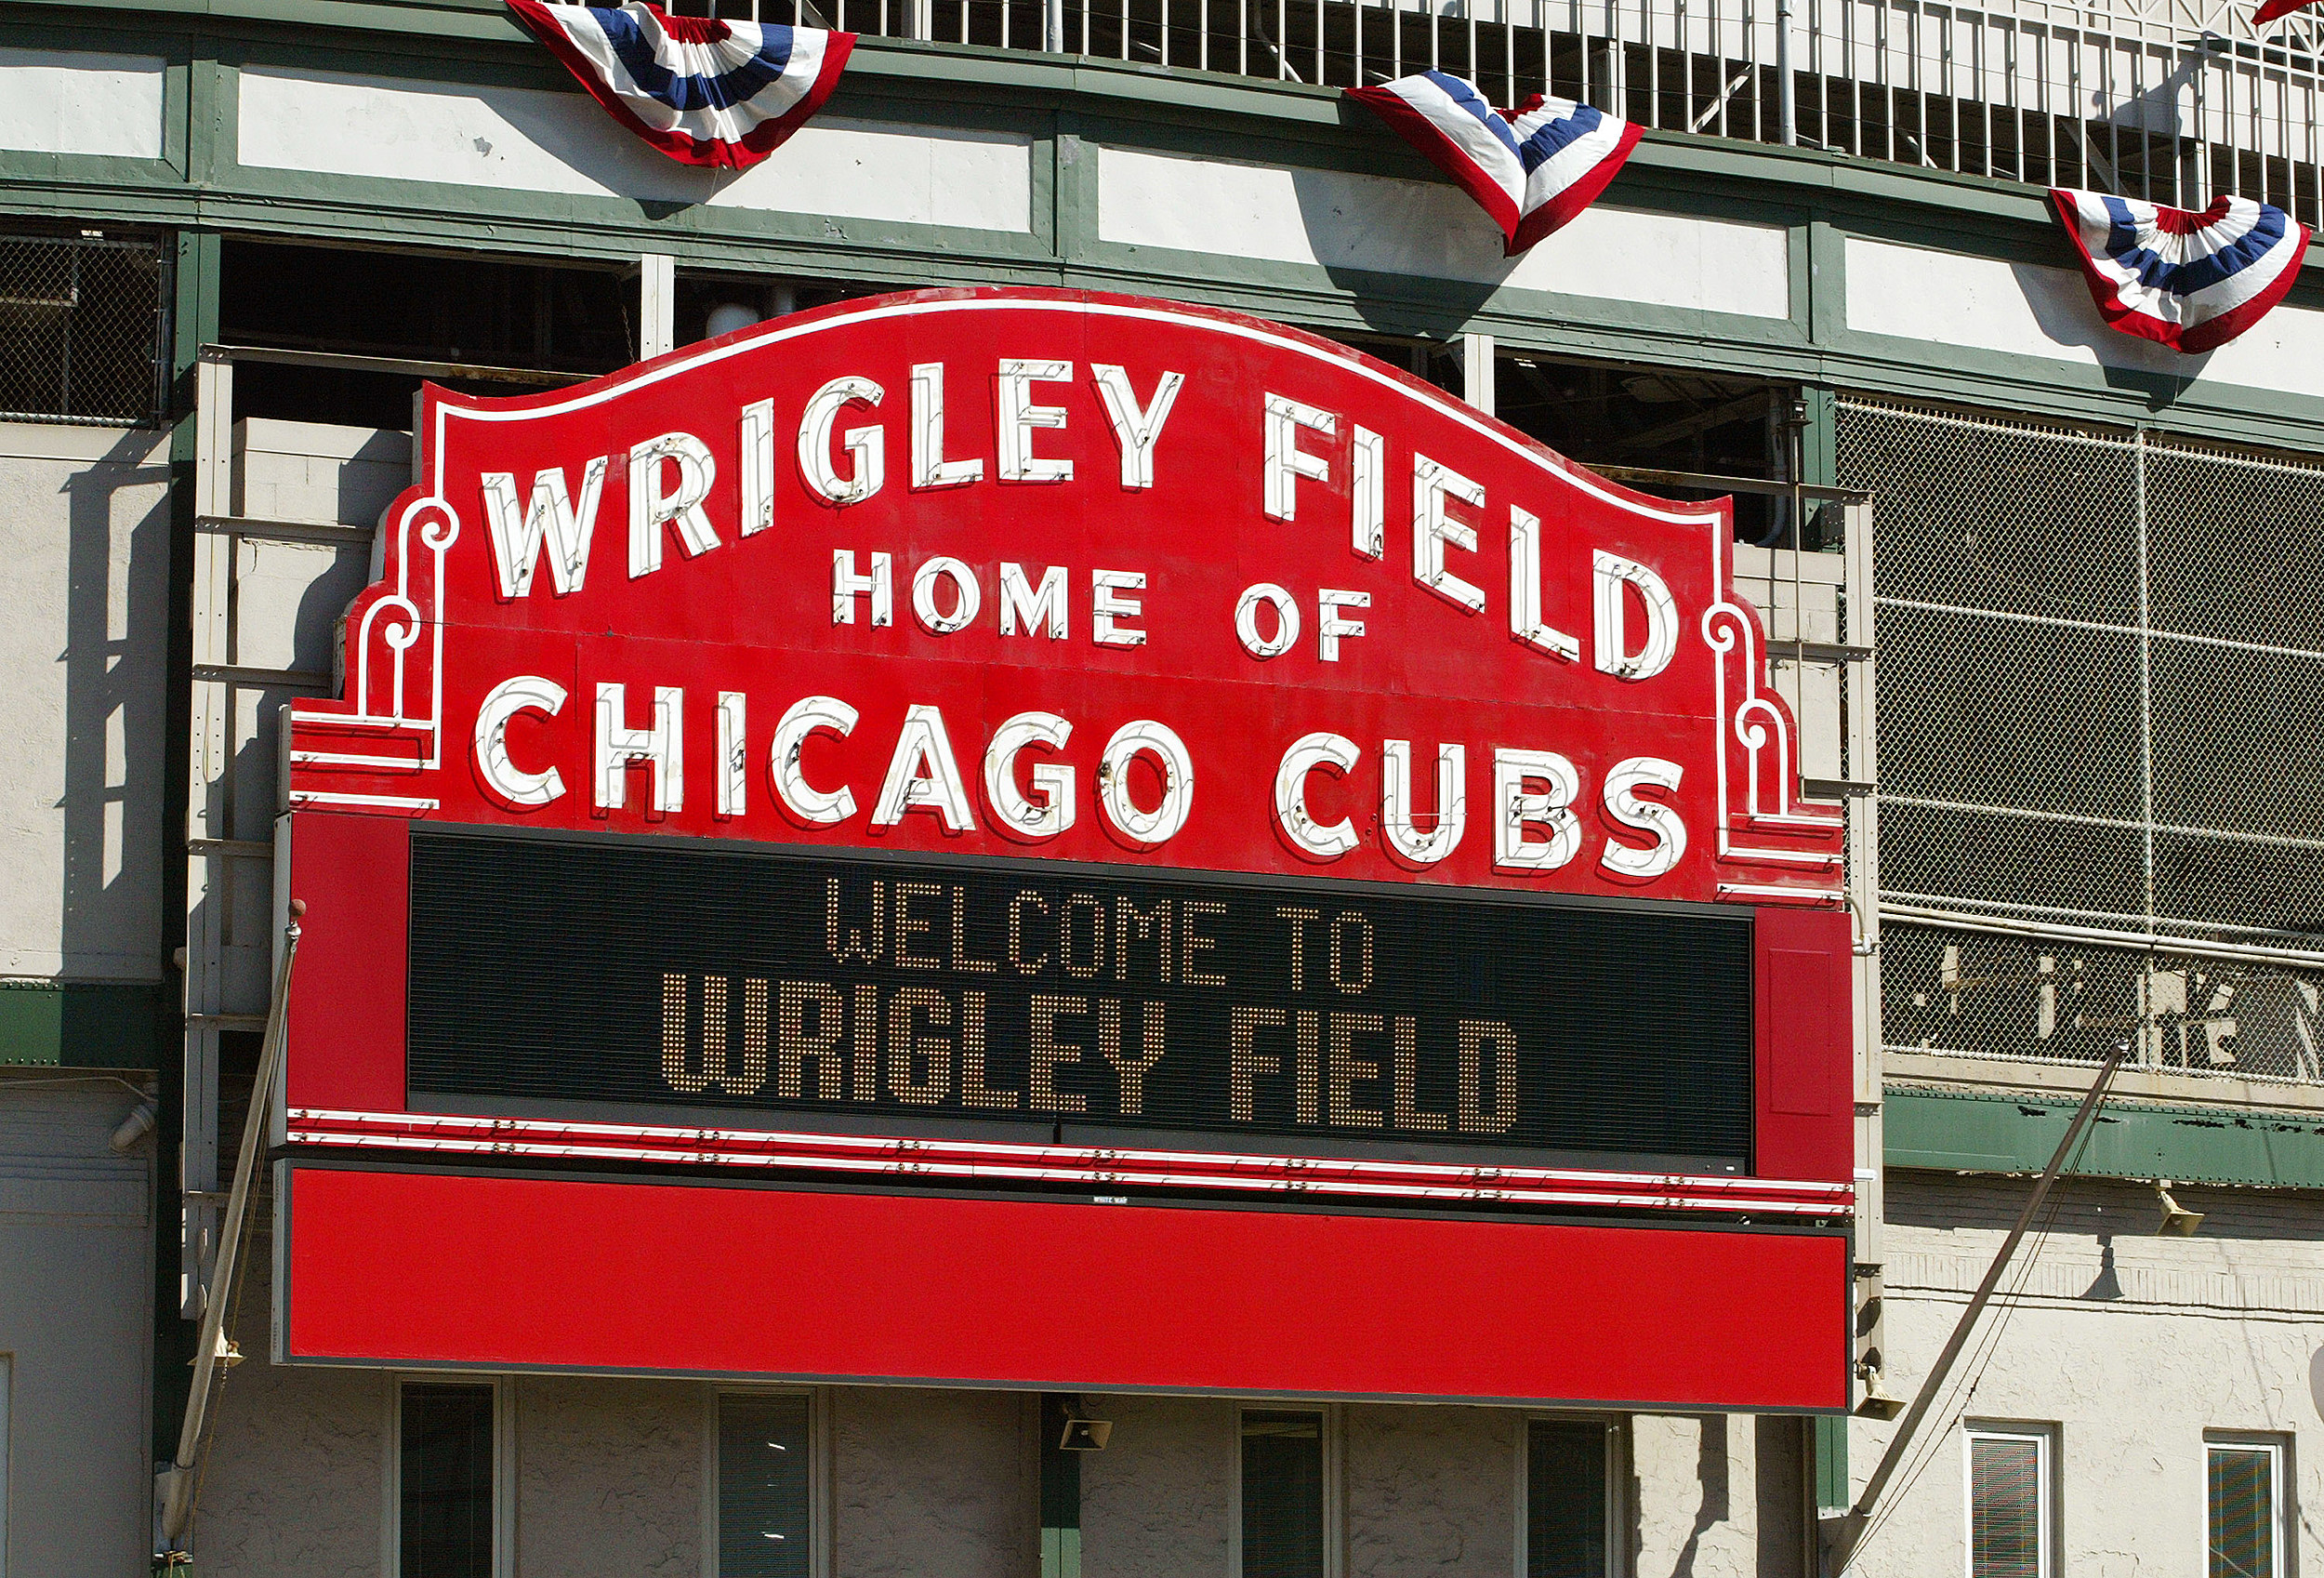 Chicago Cubs - Wrigley Field